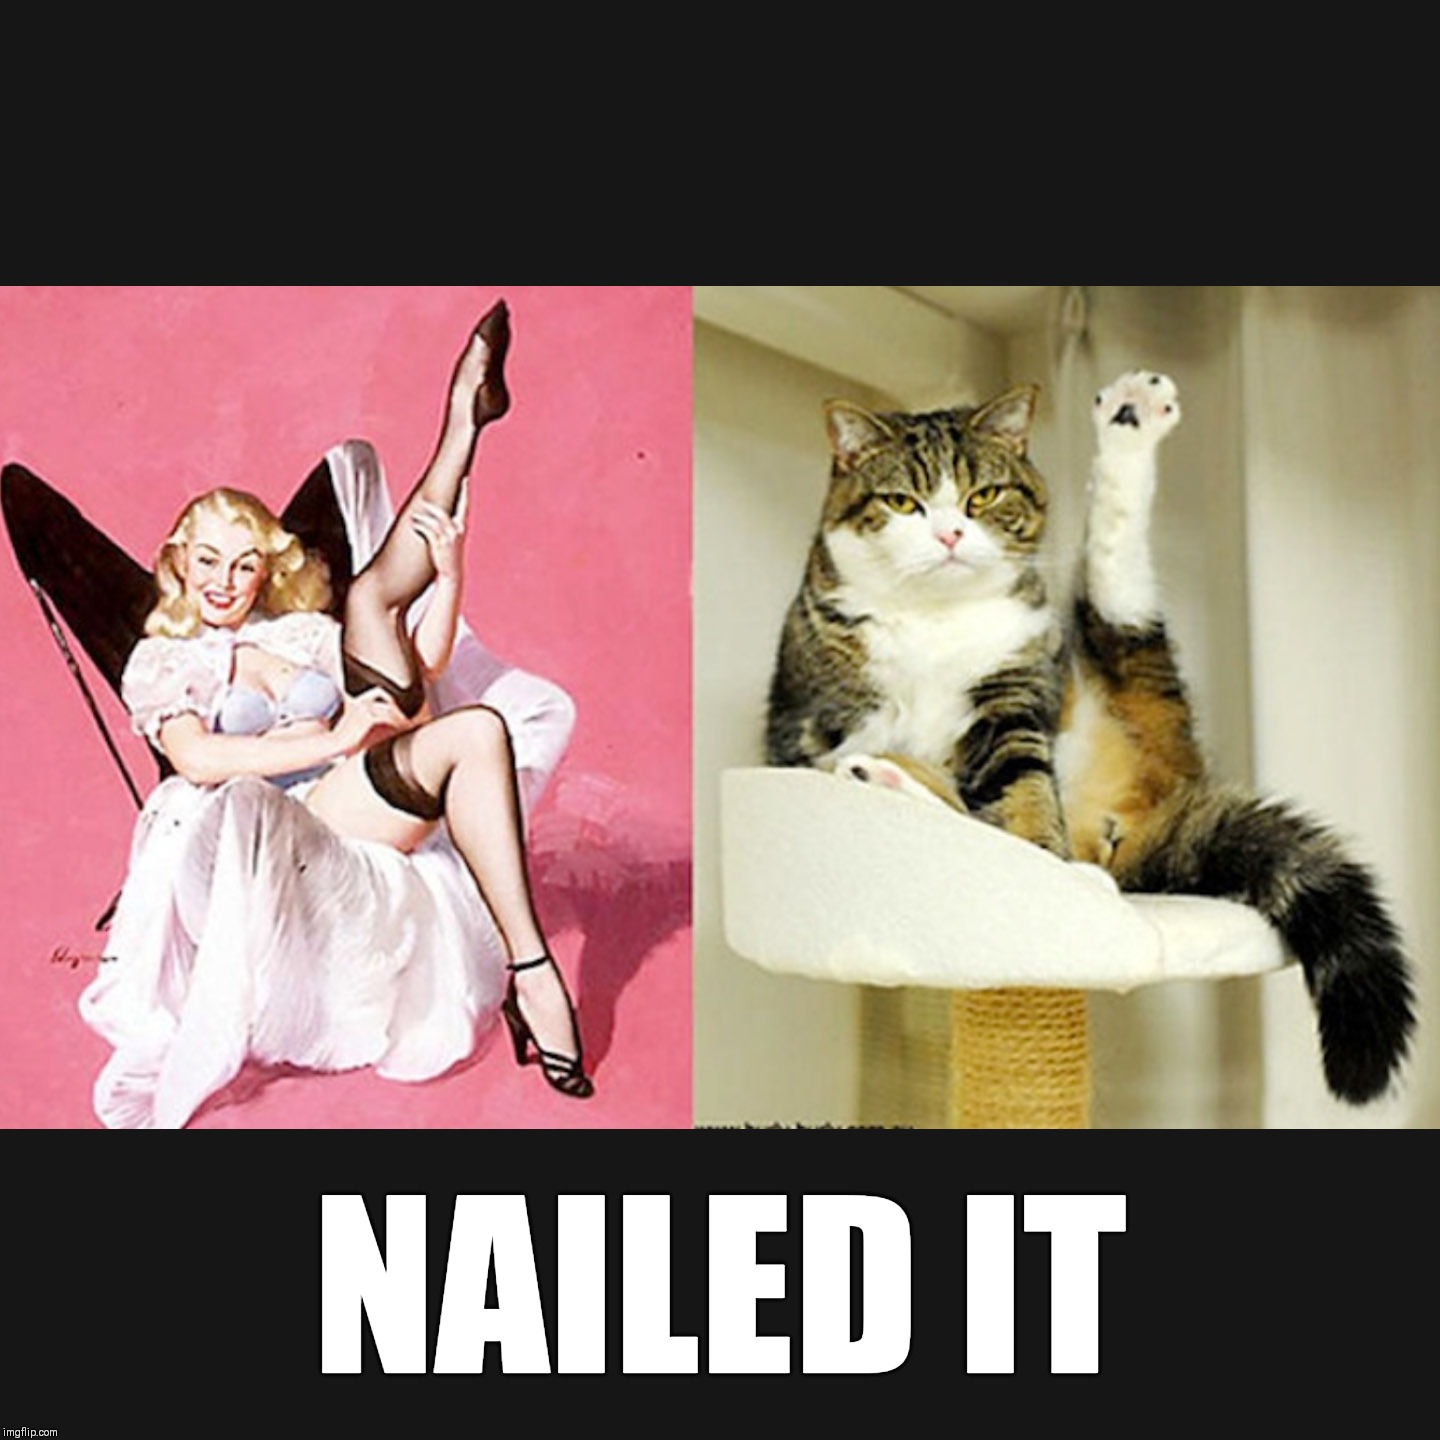 Bad Taxidermy Cat vs Sleepy Cat | Nailed It | Know Your Meme